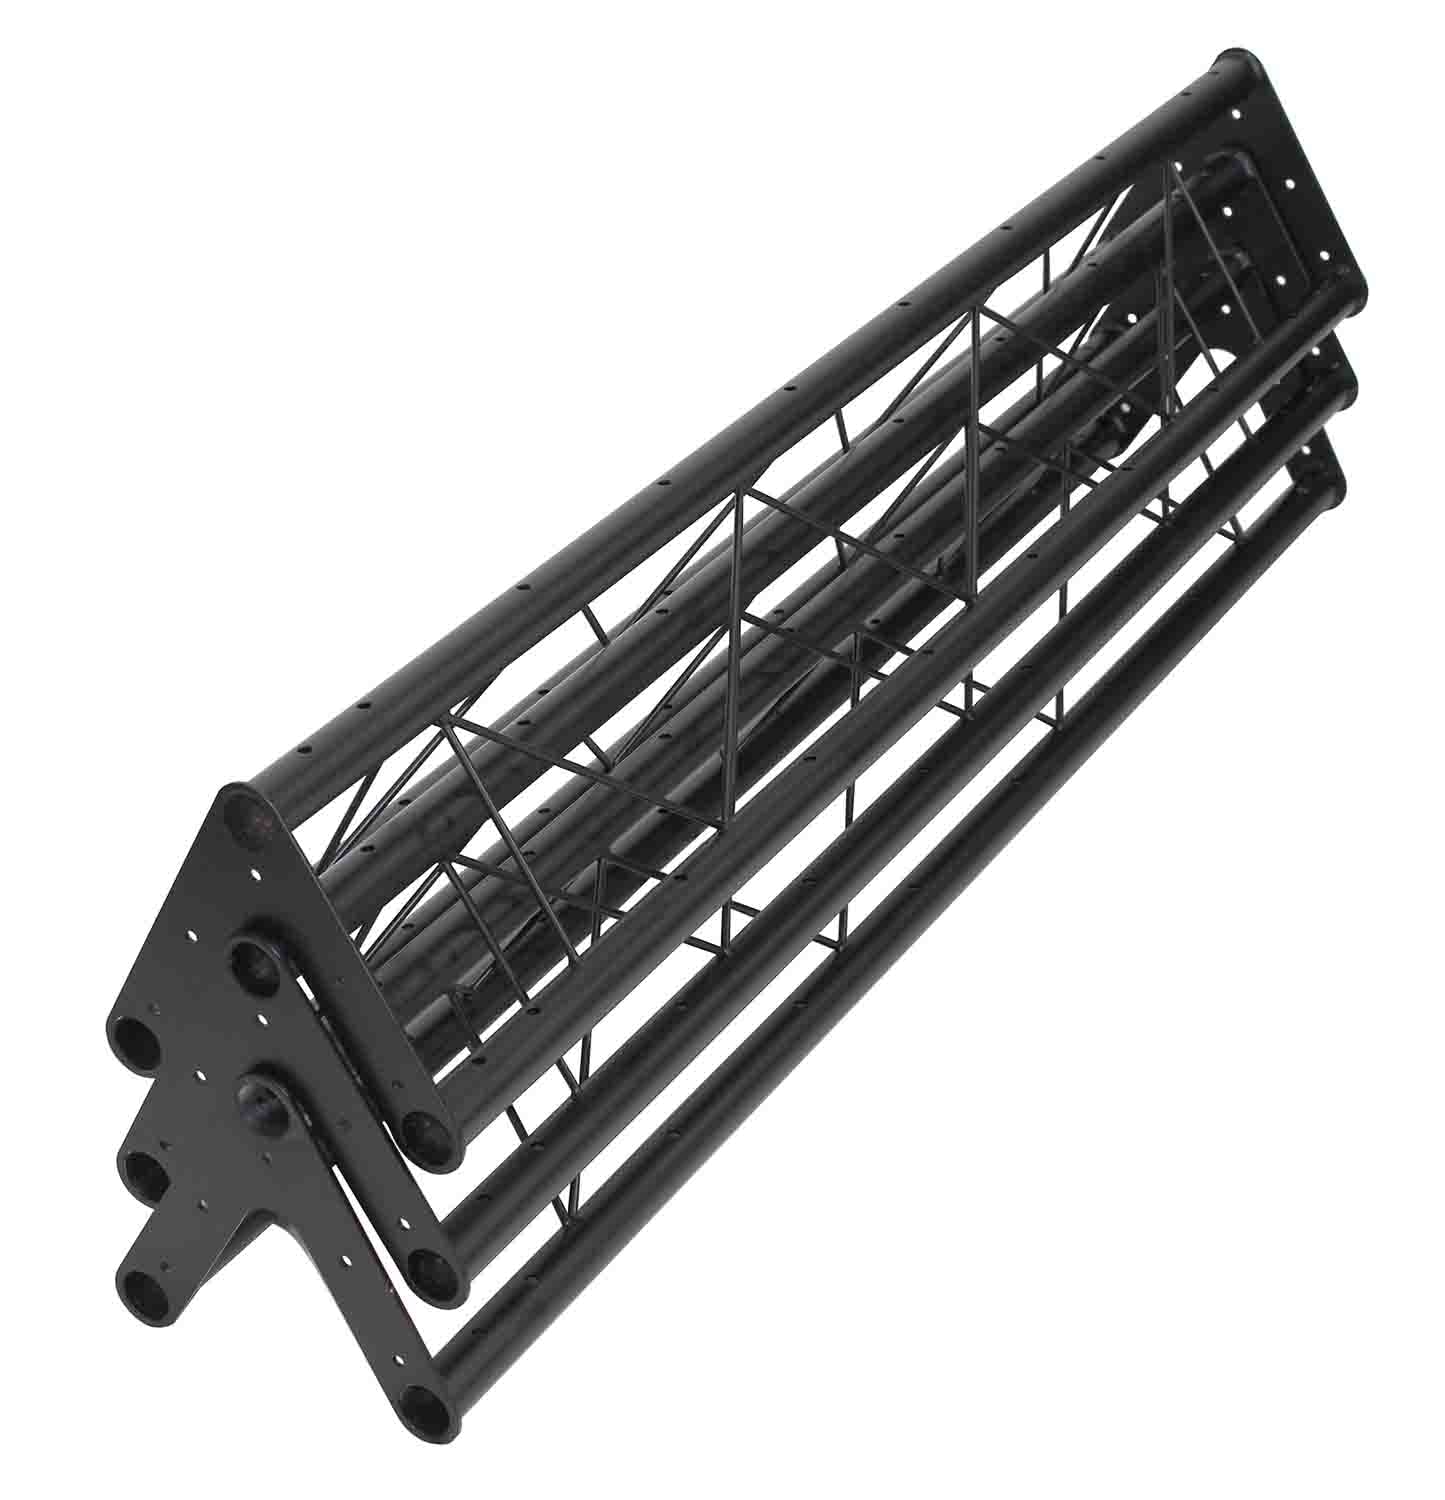 B-Stock: ProX T-LS35VC Truss S/3 57" Triangle Truss for T-LS35VC - Pack of 3 Truss by ProX Cases